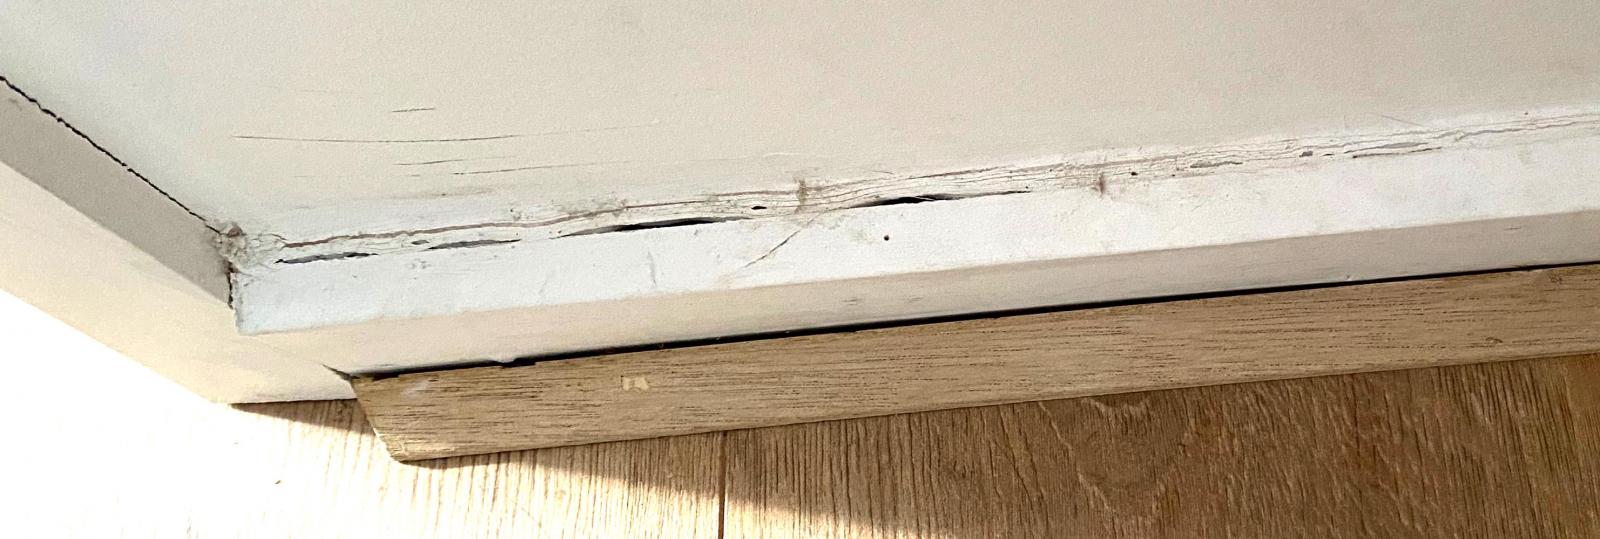 Swollen Skirting Board. Is this likely water damage?